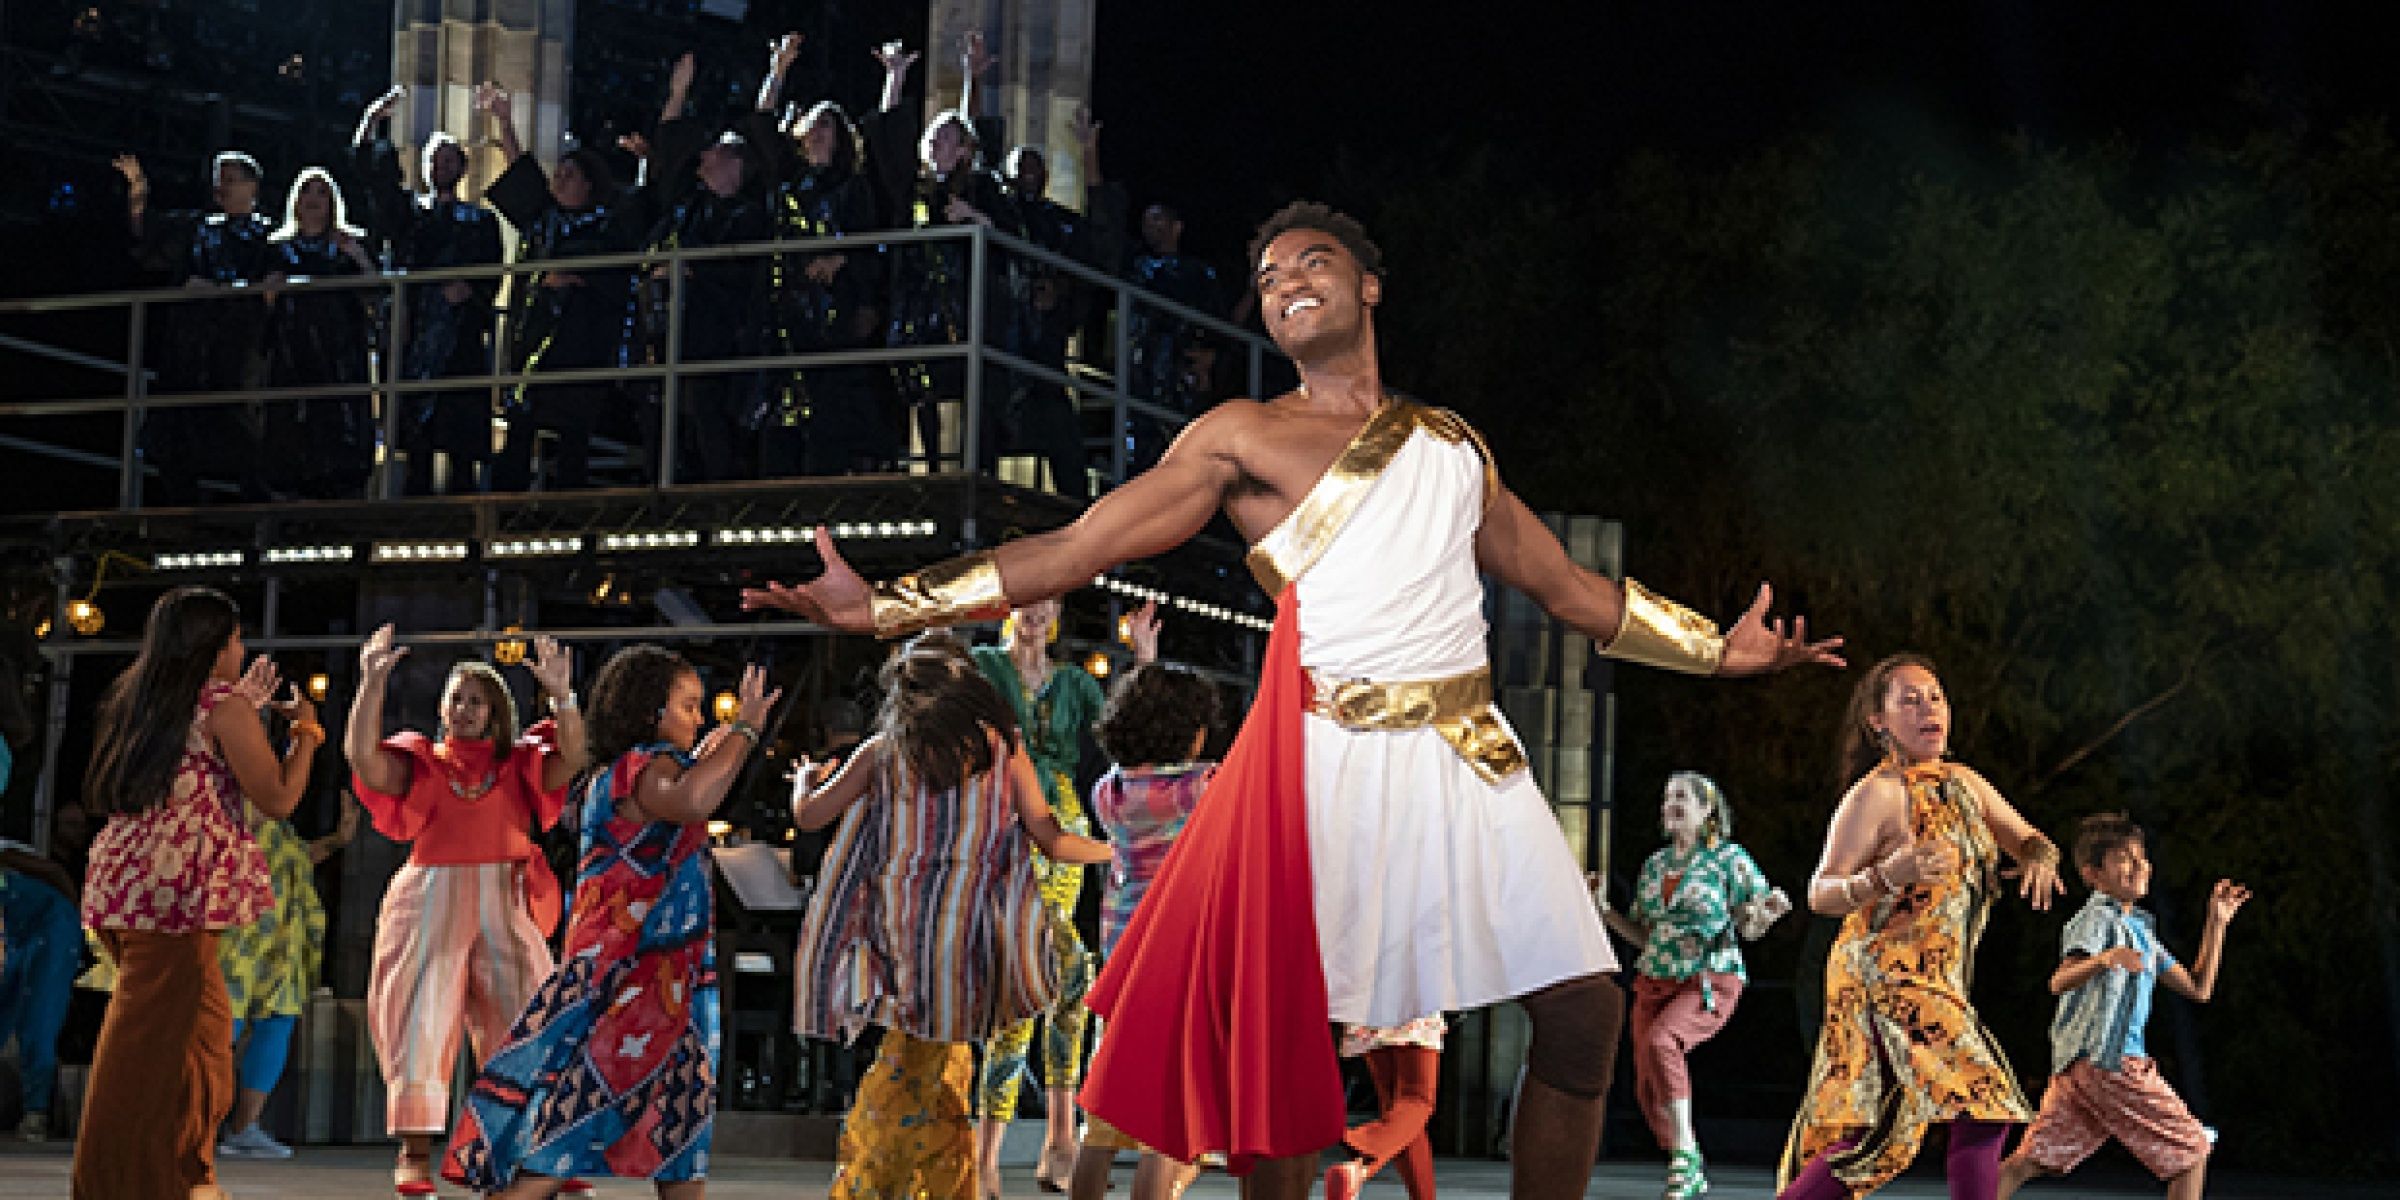 Hercules musical on stage (Credit: PlayBill.com)